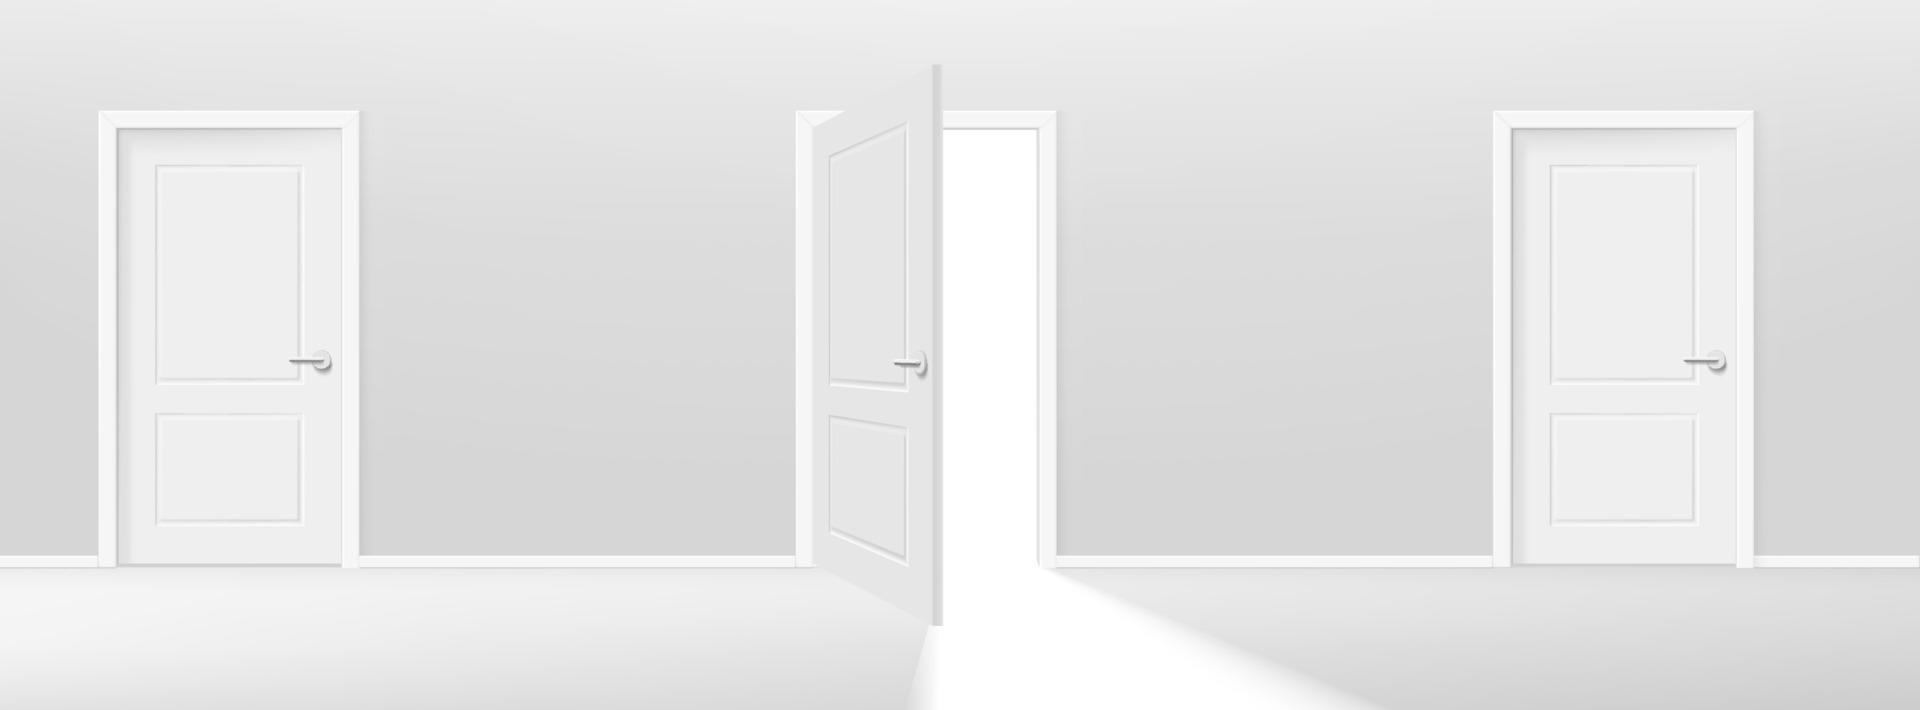 Three doors one of them is opening. Realistic 3d style vector illustration